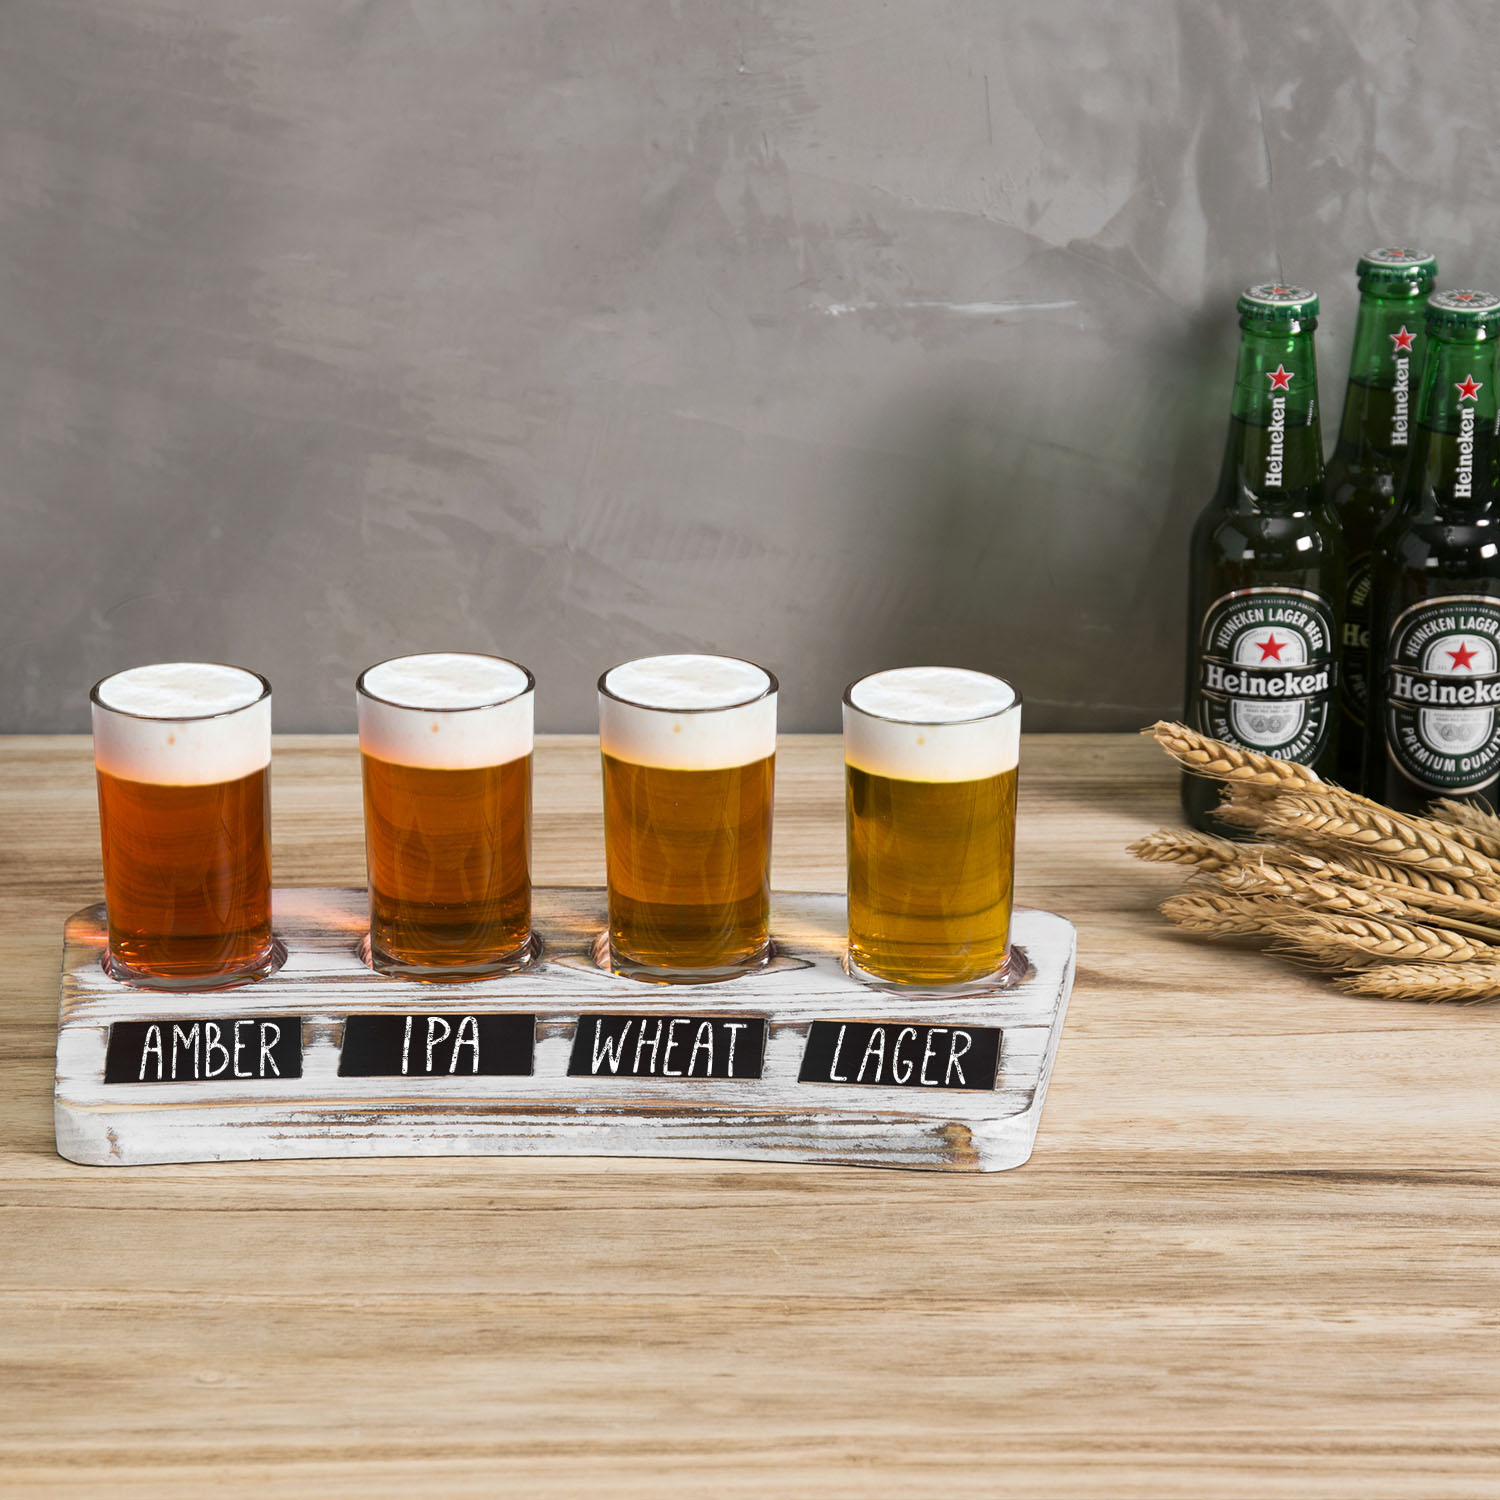 MyGift 4-Glass Whitewashed Wood Beer Flight Sampler Serving Tray with Chalkboard Labels - image 3 of 7